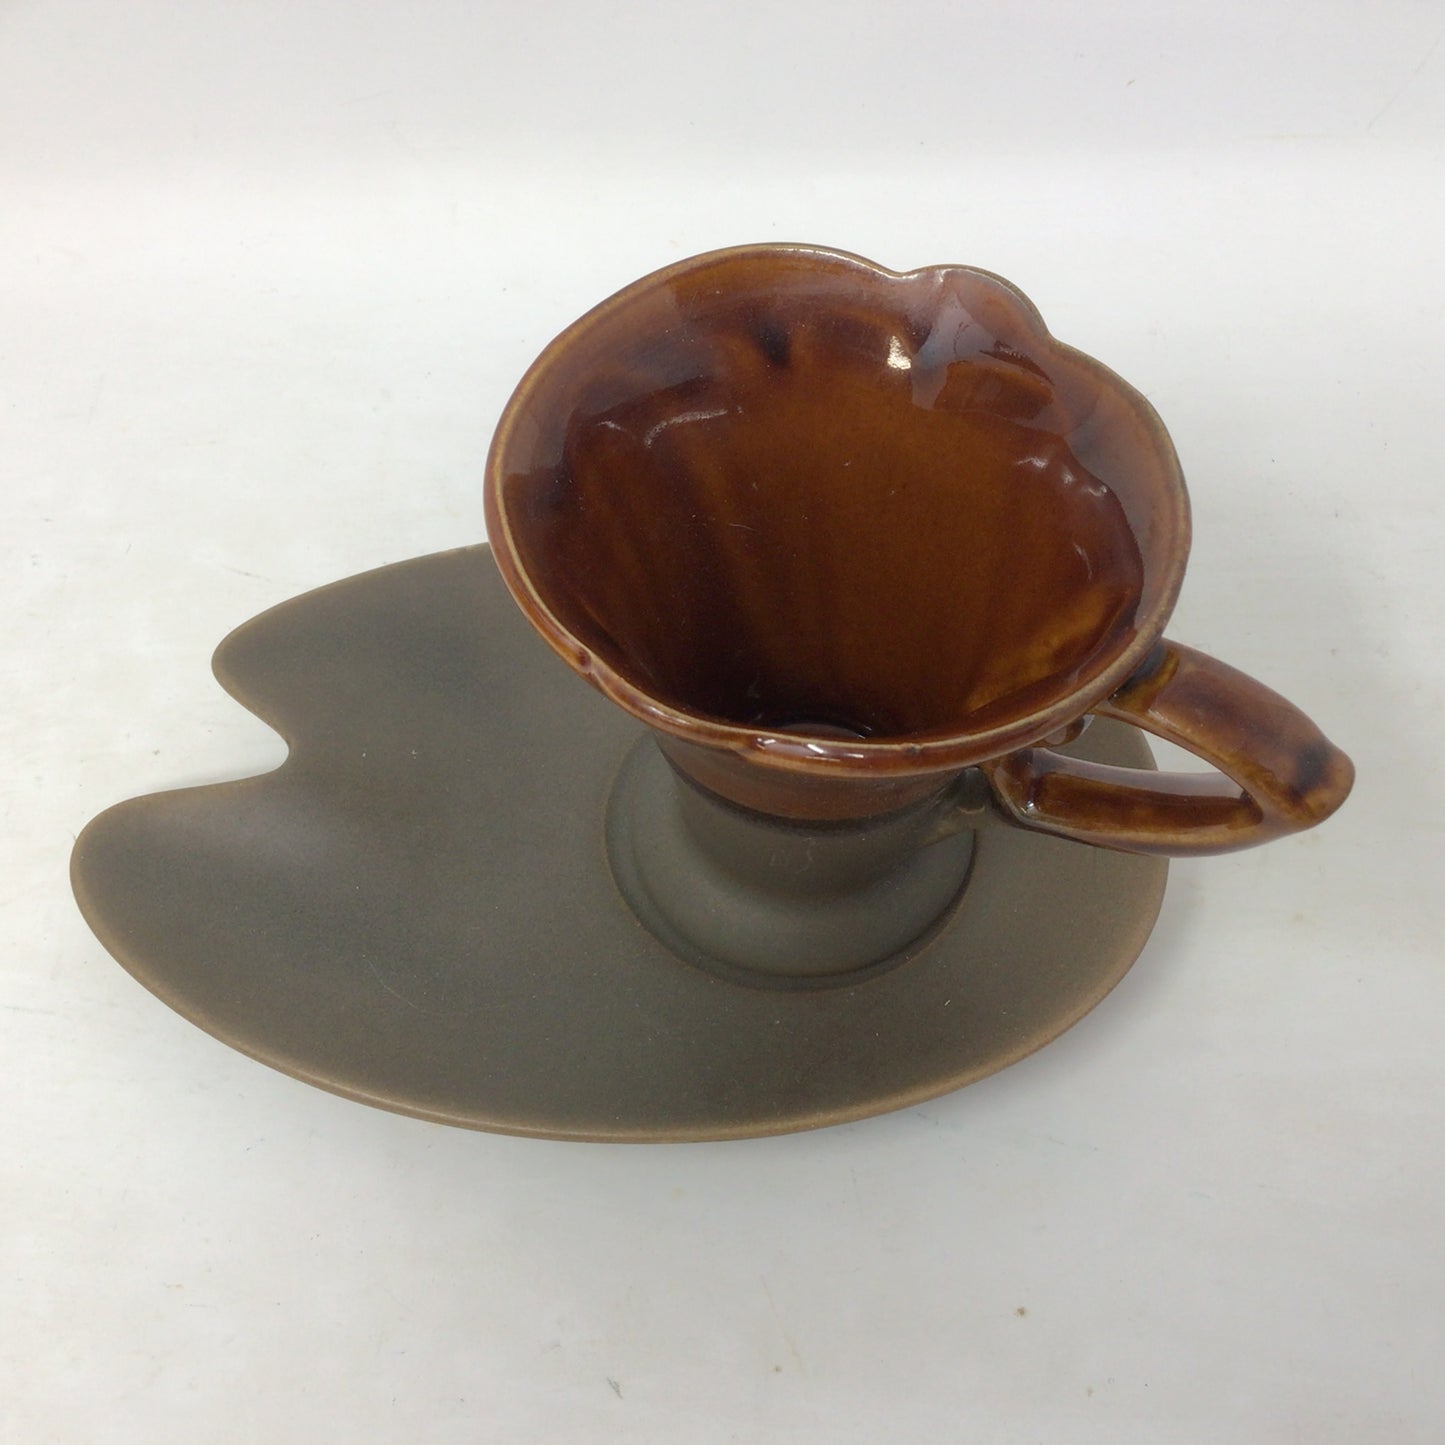 Demitasse Espresso Cups and Snack Plates with Stand